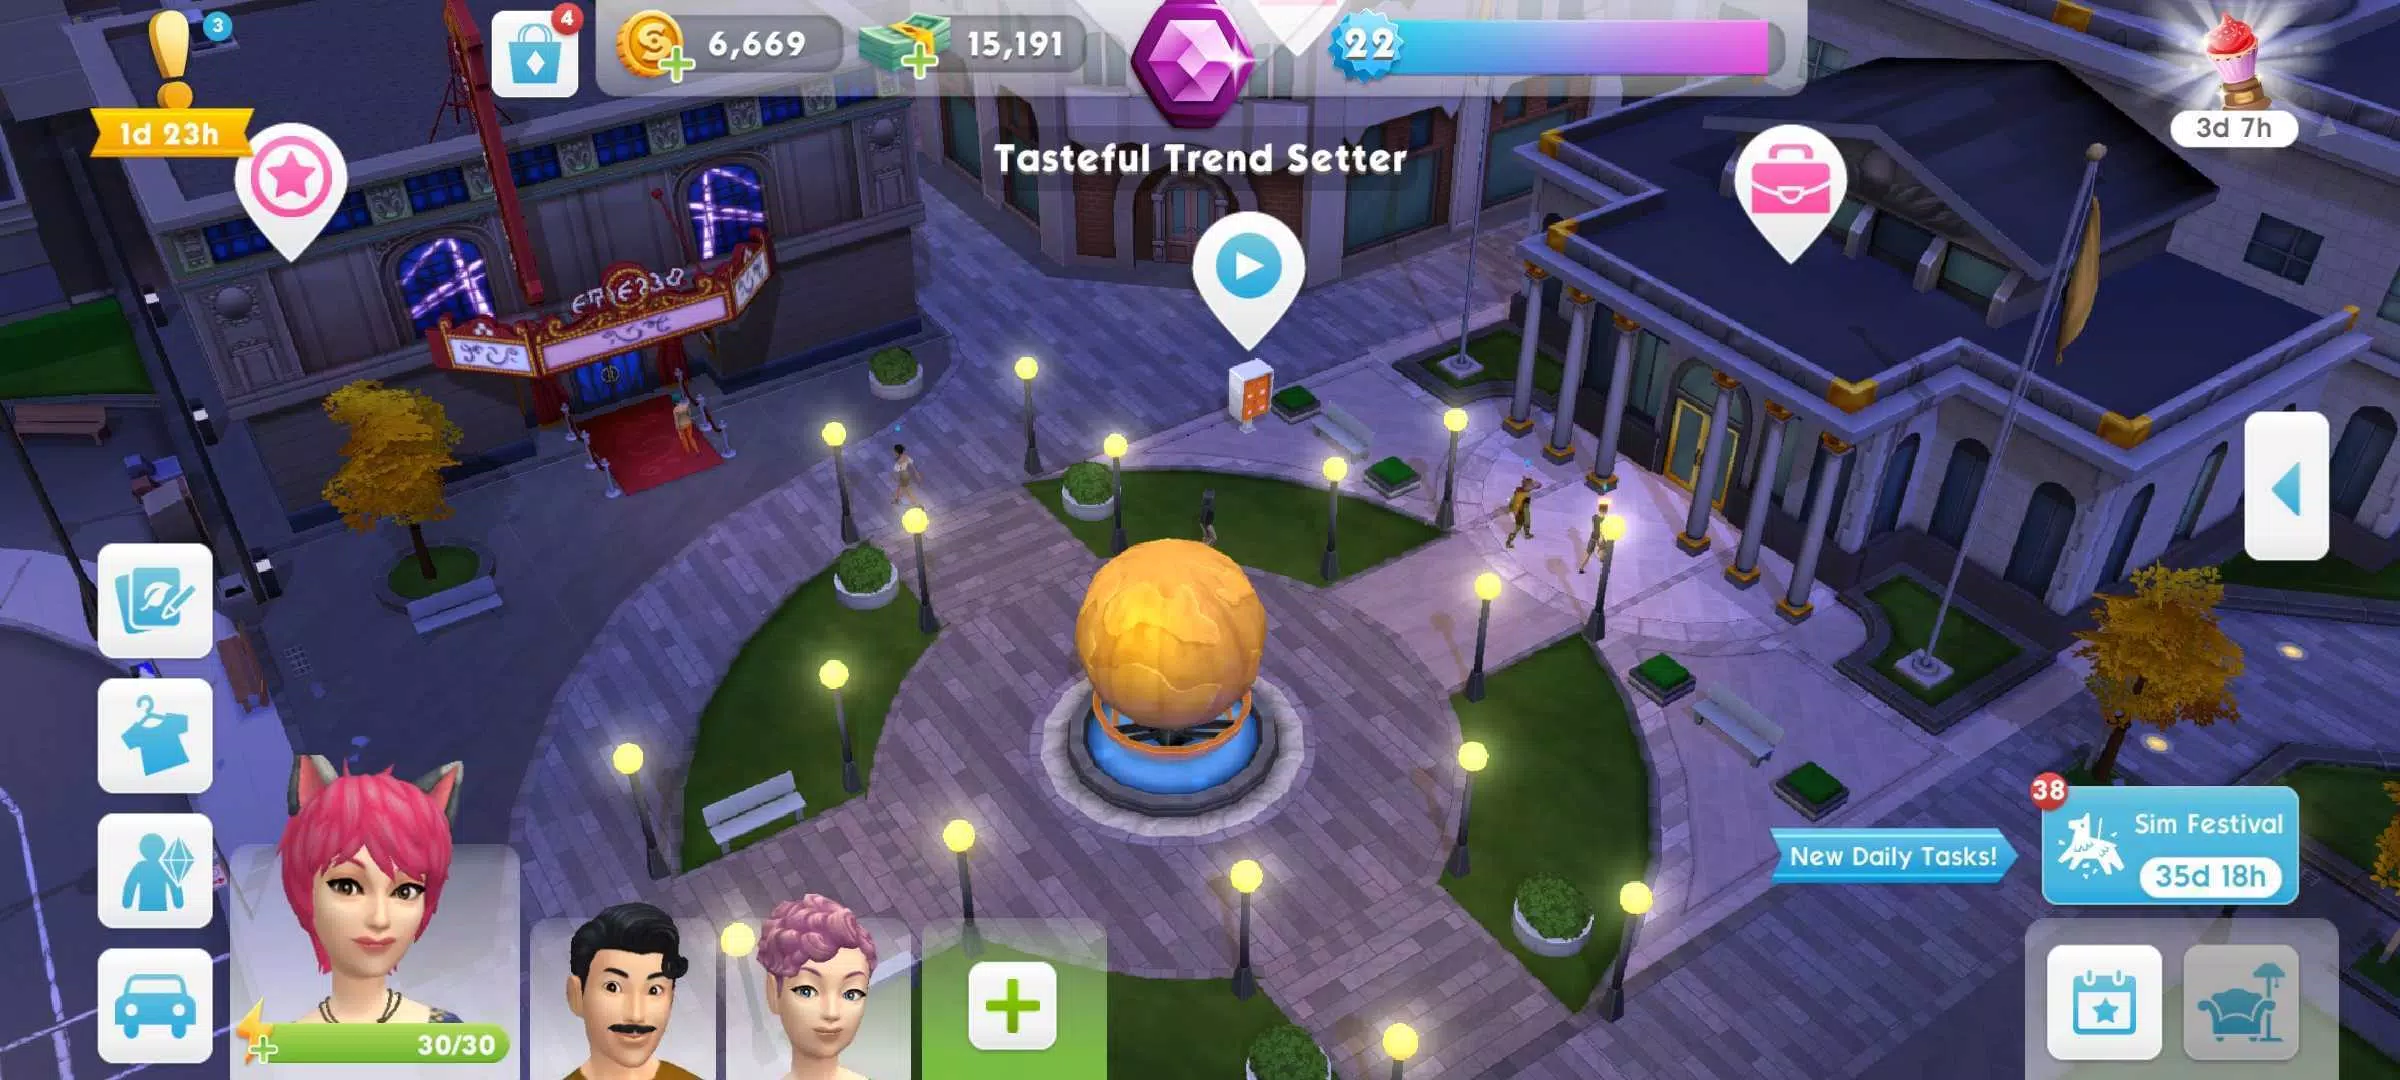 how-to-get-free-money-on-sims-mobile